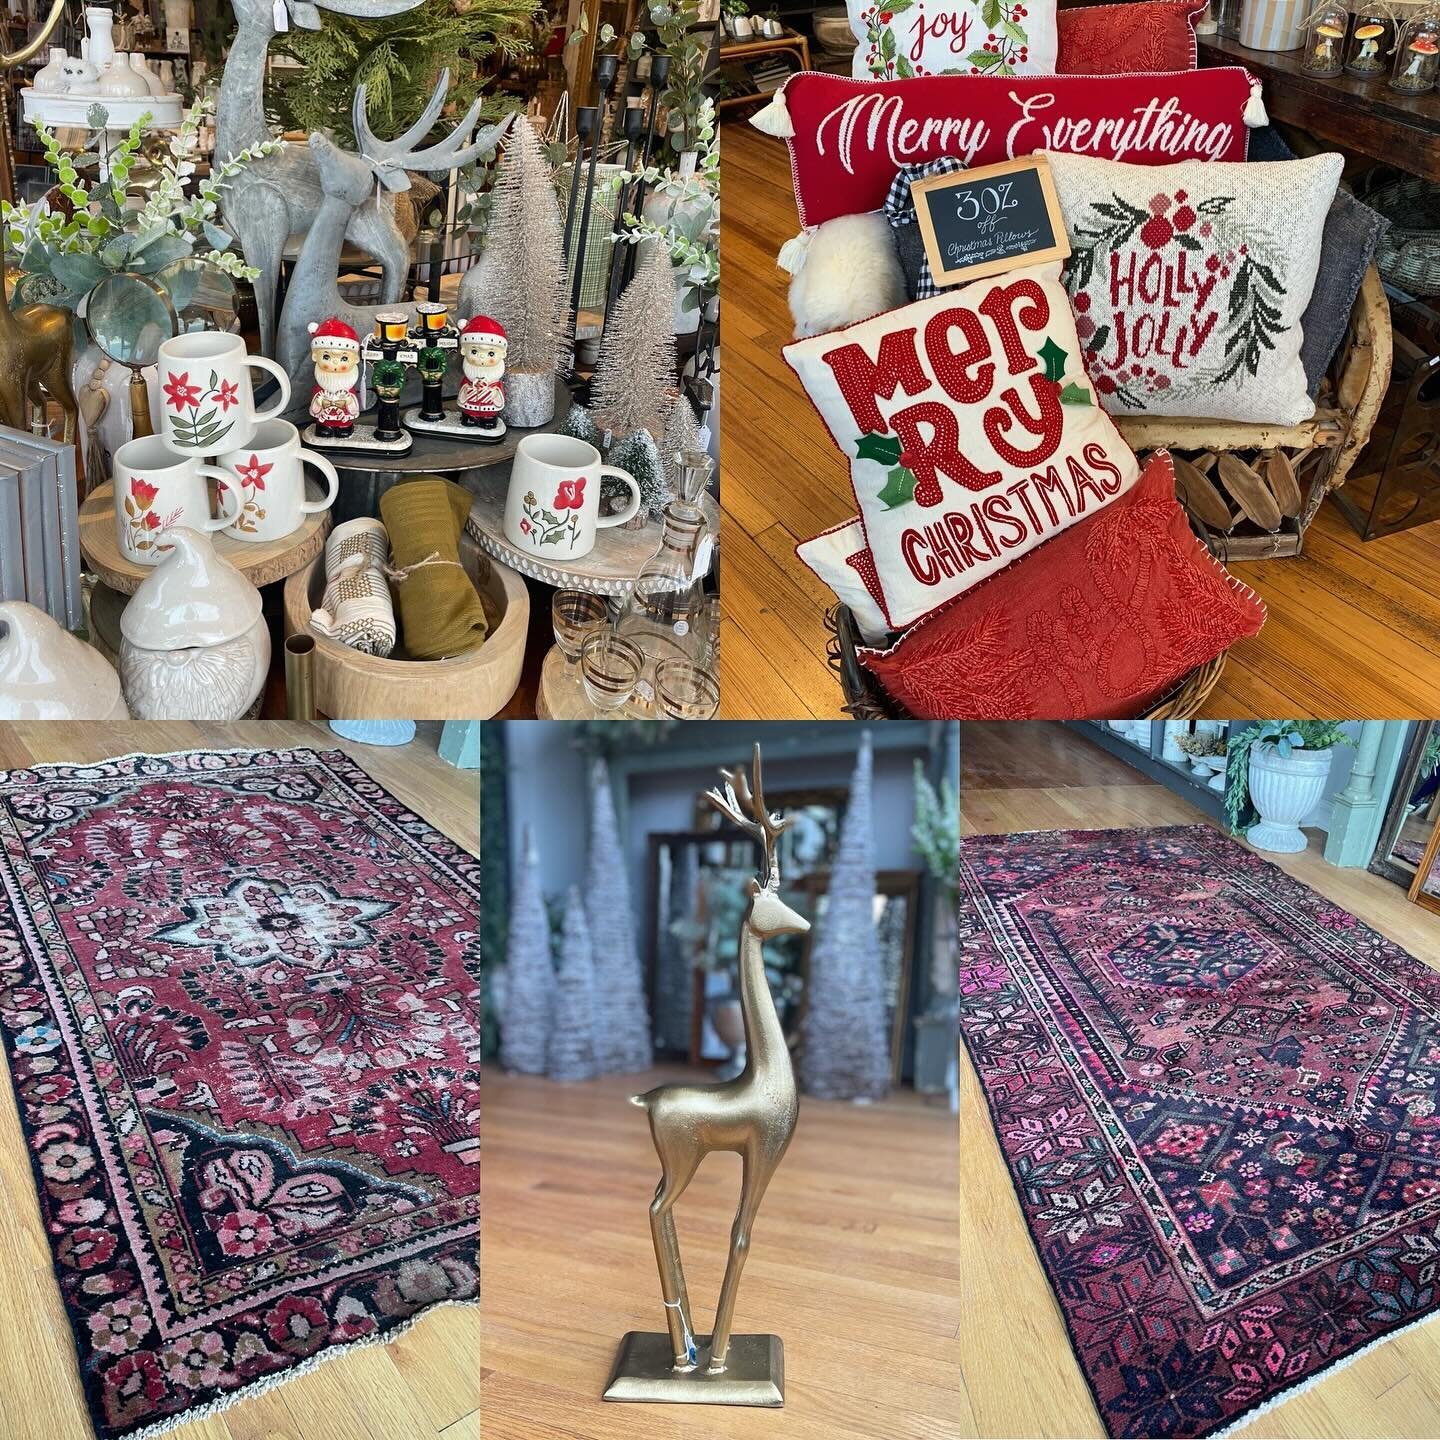 Our after Christmas SALE is in full swing!! 50% off all Christmas and 10% off everything else in the store!!! Open today 11-5! 3 days left! 

#bluebirdhomedecor #giftshop #schenectady #shopsmallbusiness #sale #vintagerugs